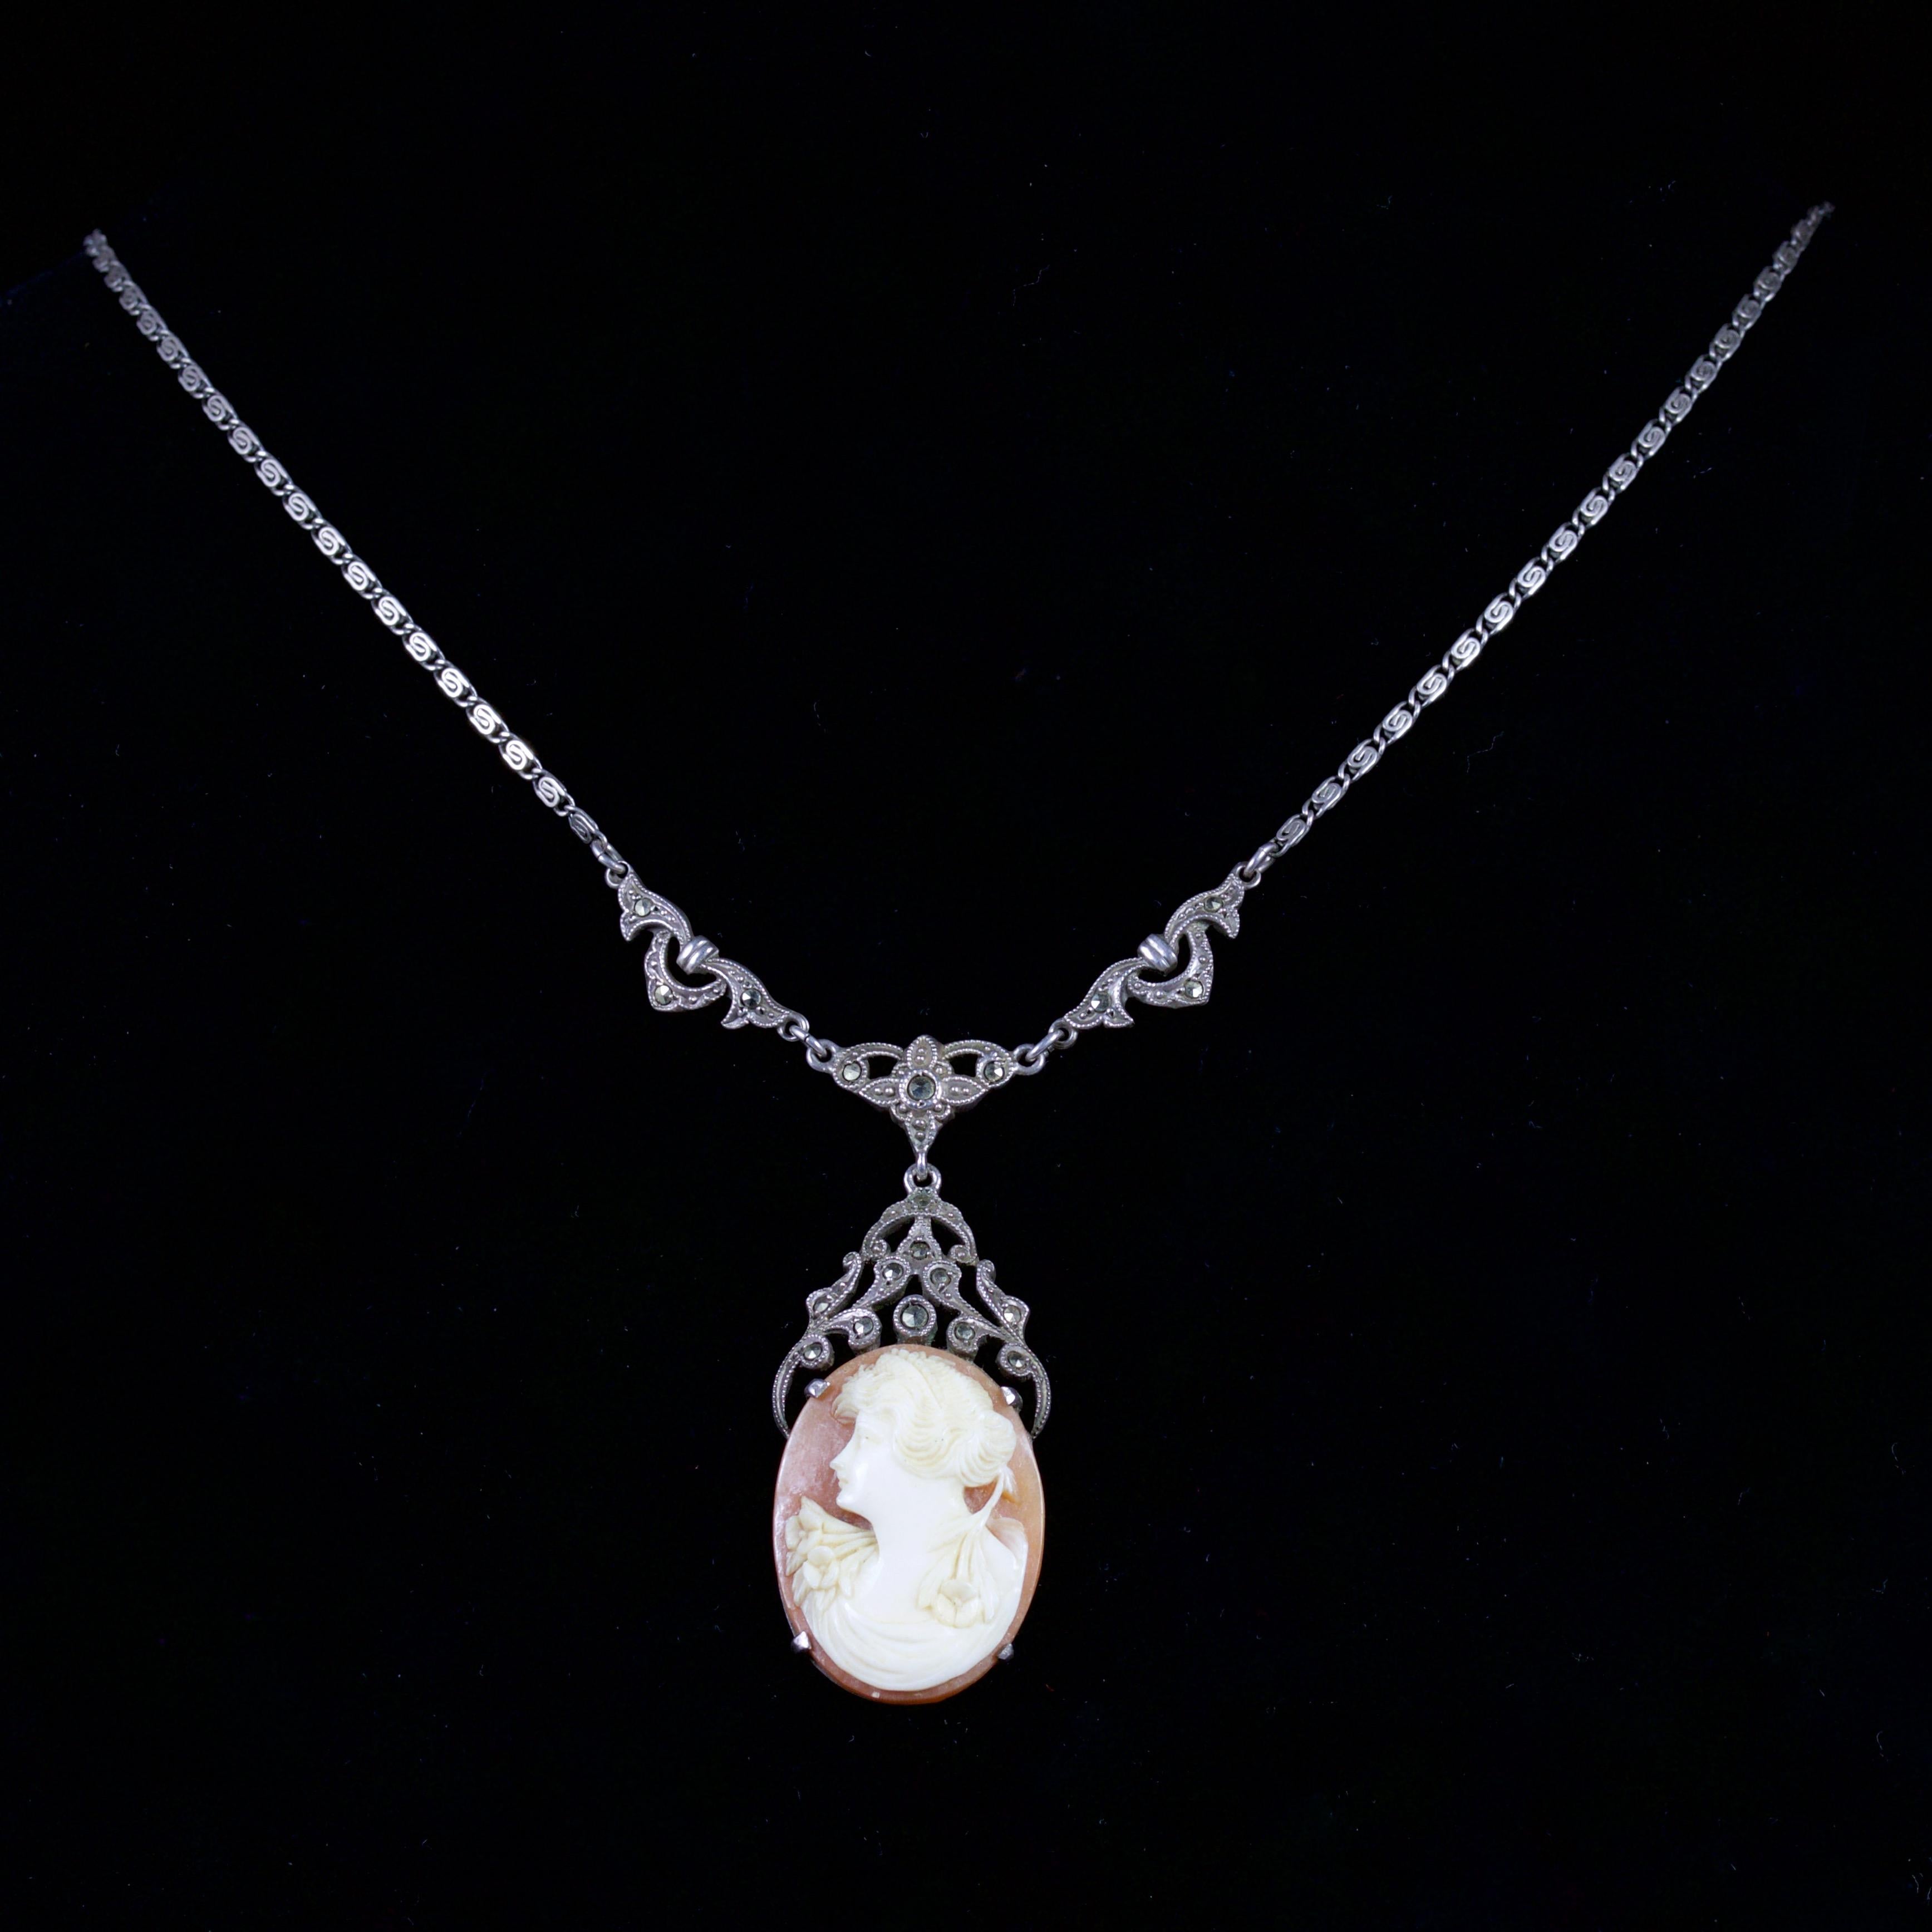 This beautiful Cameo and Marcasite necklace is set in Sterling Silver, Circa 1900.

The necklace boasts a well executed Cameo, which is hand-carved.

The Cameo is surrounded by Marcasites in a pierced Silver Motif.

It is surrounded by a pierced and